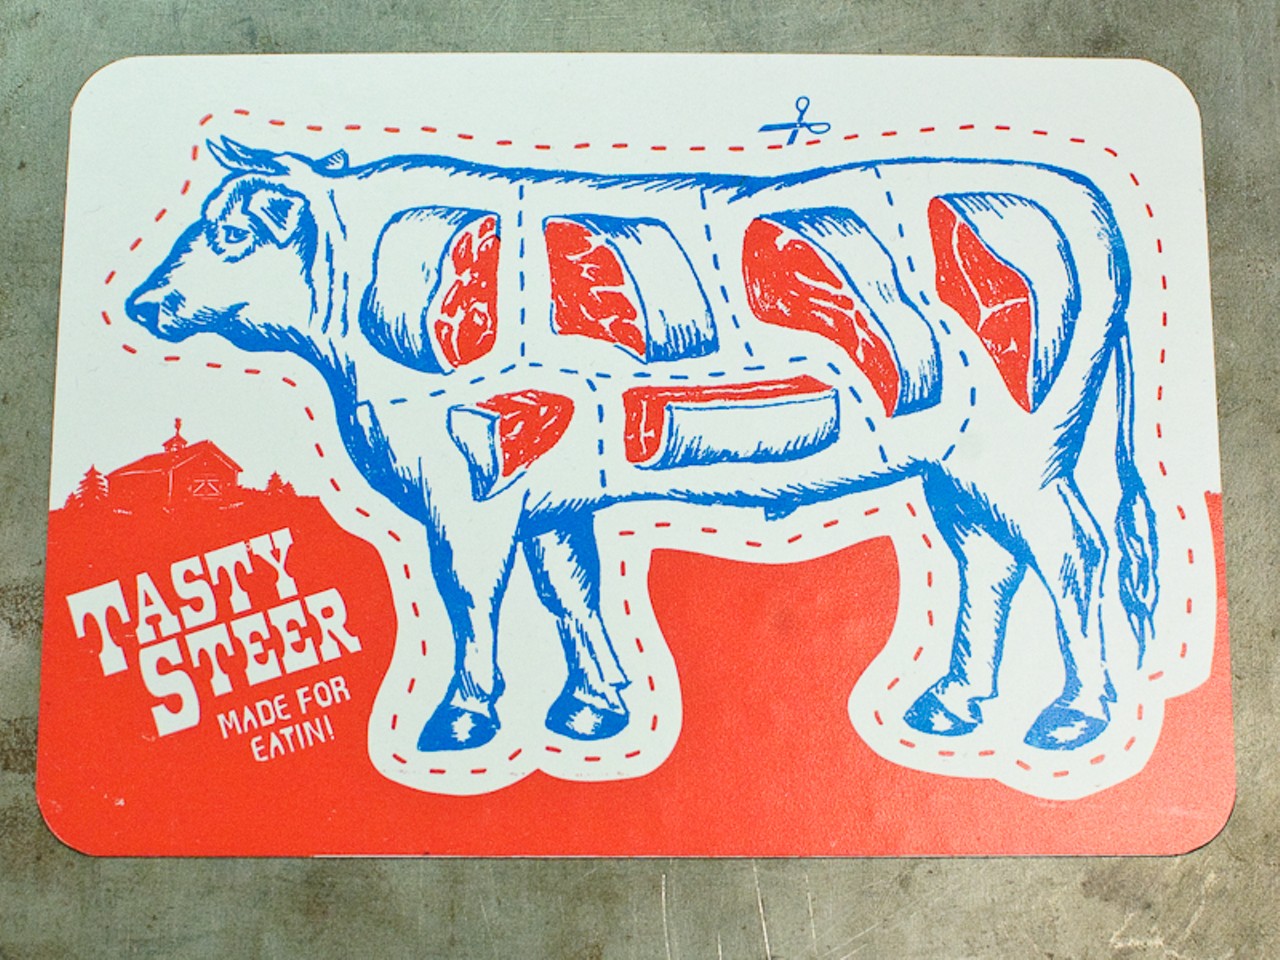 The Firecracker Press, an organizer of the Cherokee Print League&rsquo;s sale, had Tasty Steer stickers available for purchase. It&rsquo;s an educational piece.